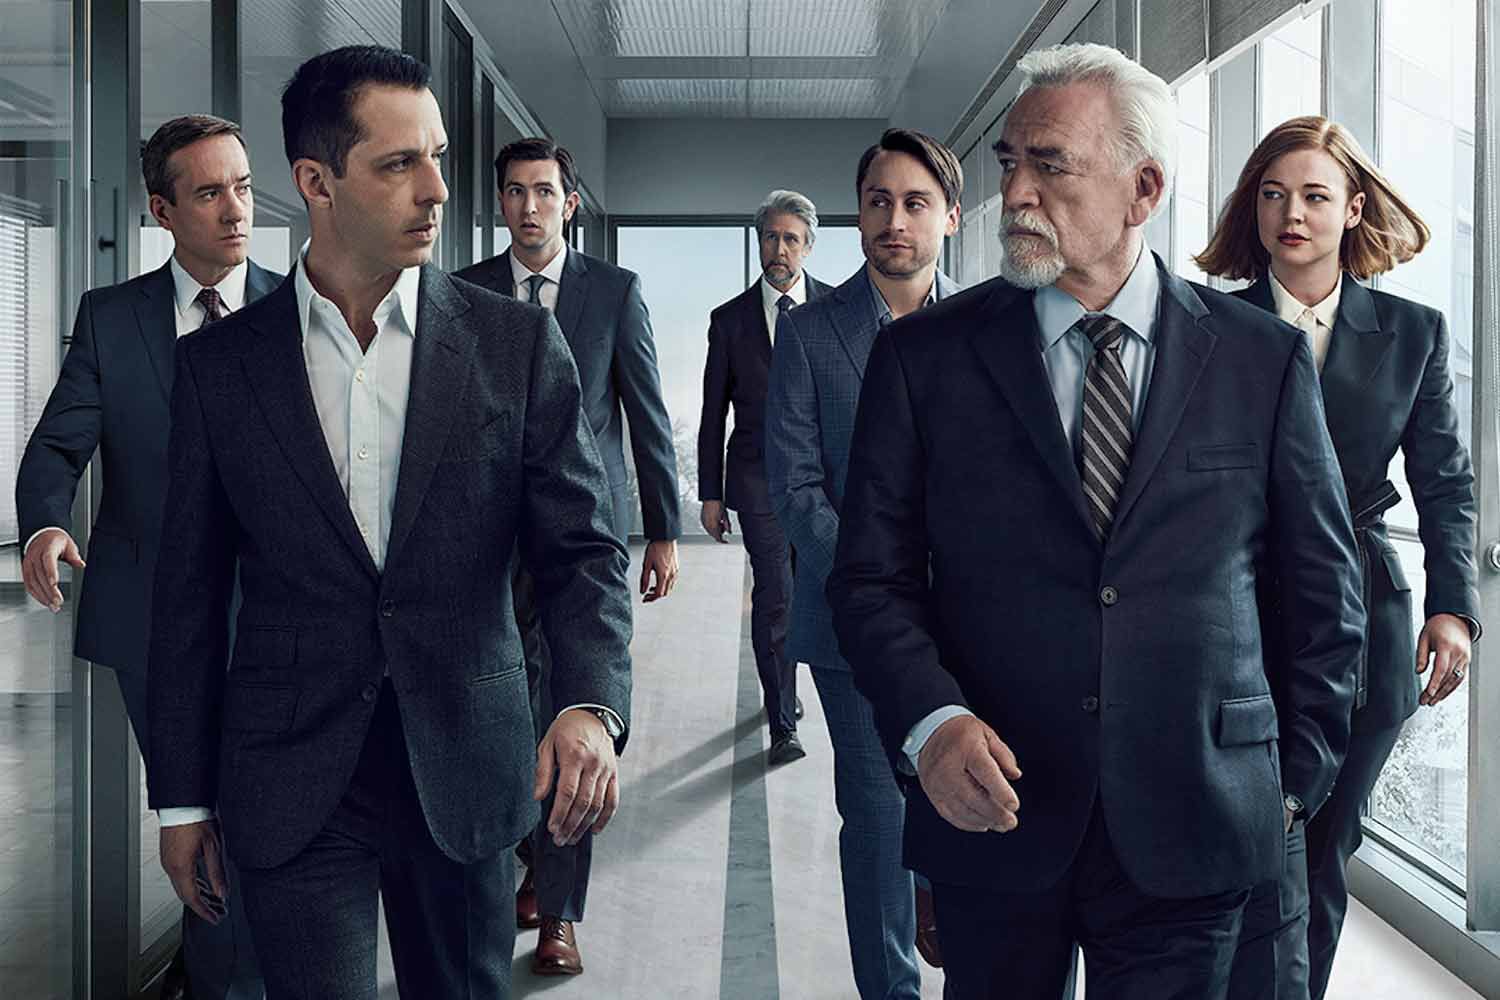 Succession: the best television series of the last 5 years